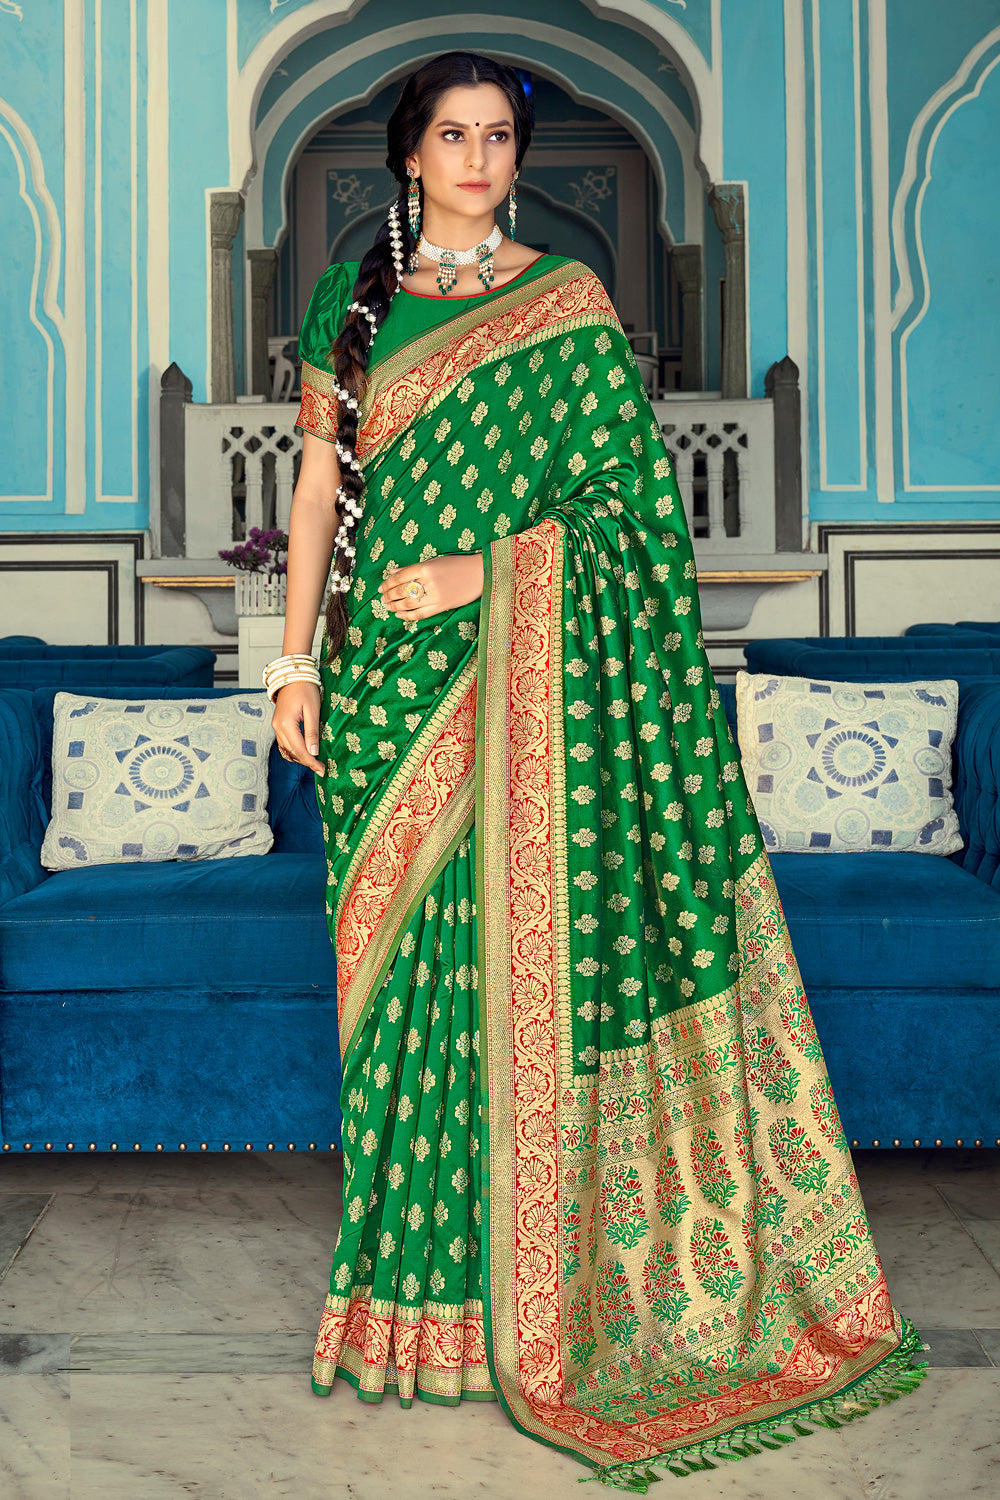 Assam Silk Saree In Hooghly - Prices, Manufacturers & Suppliers